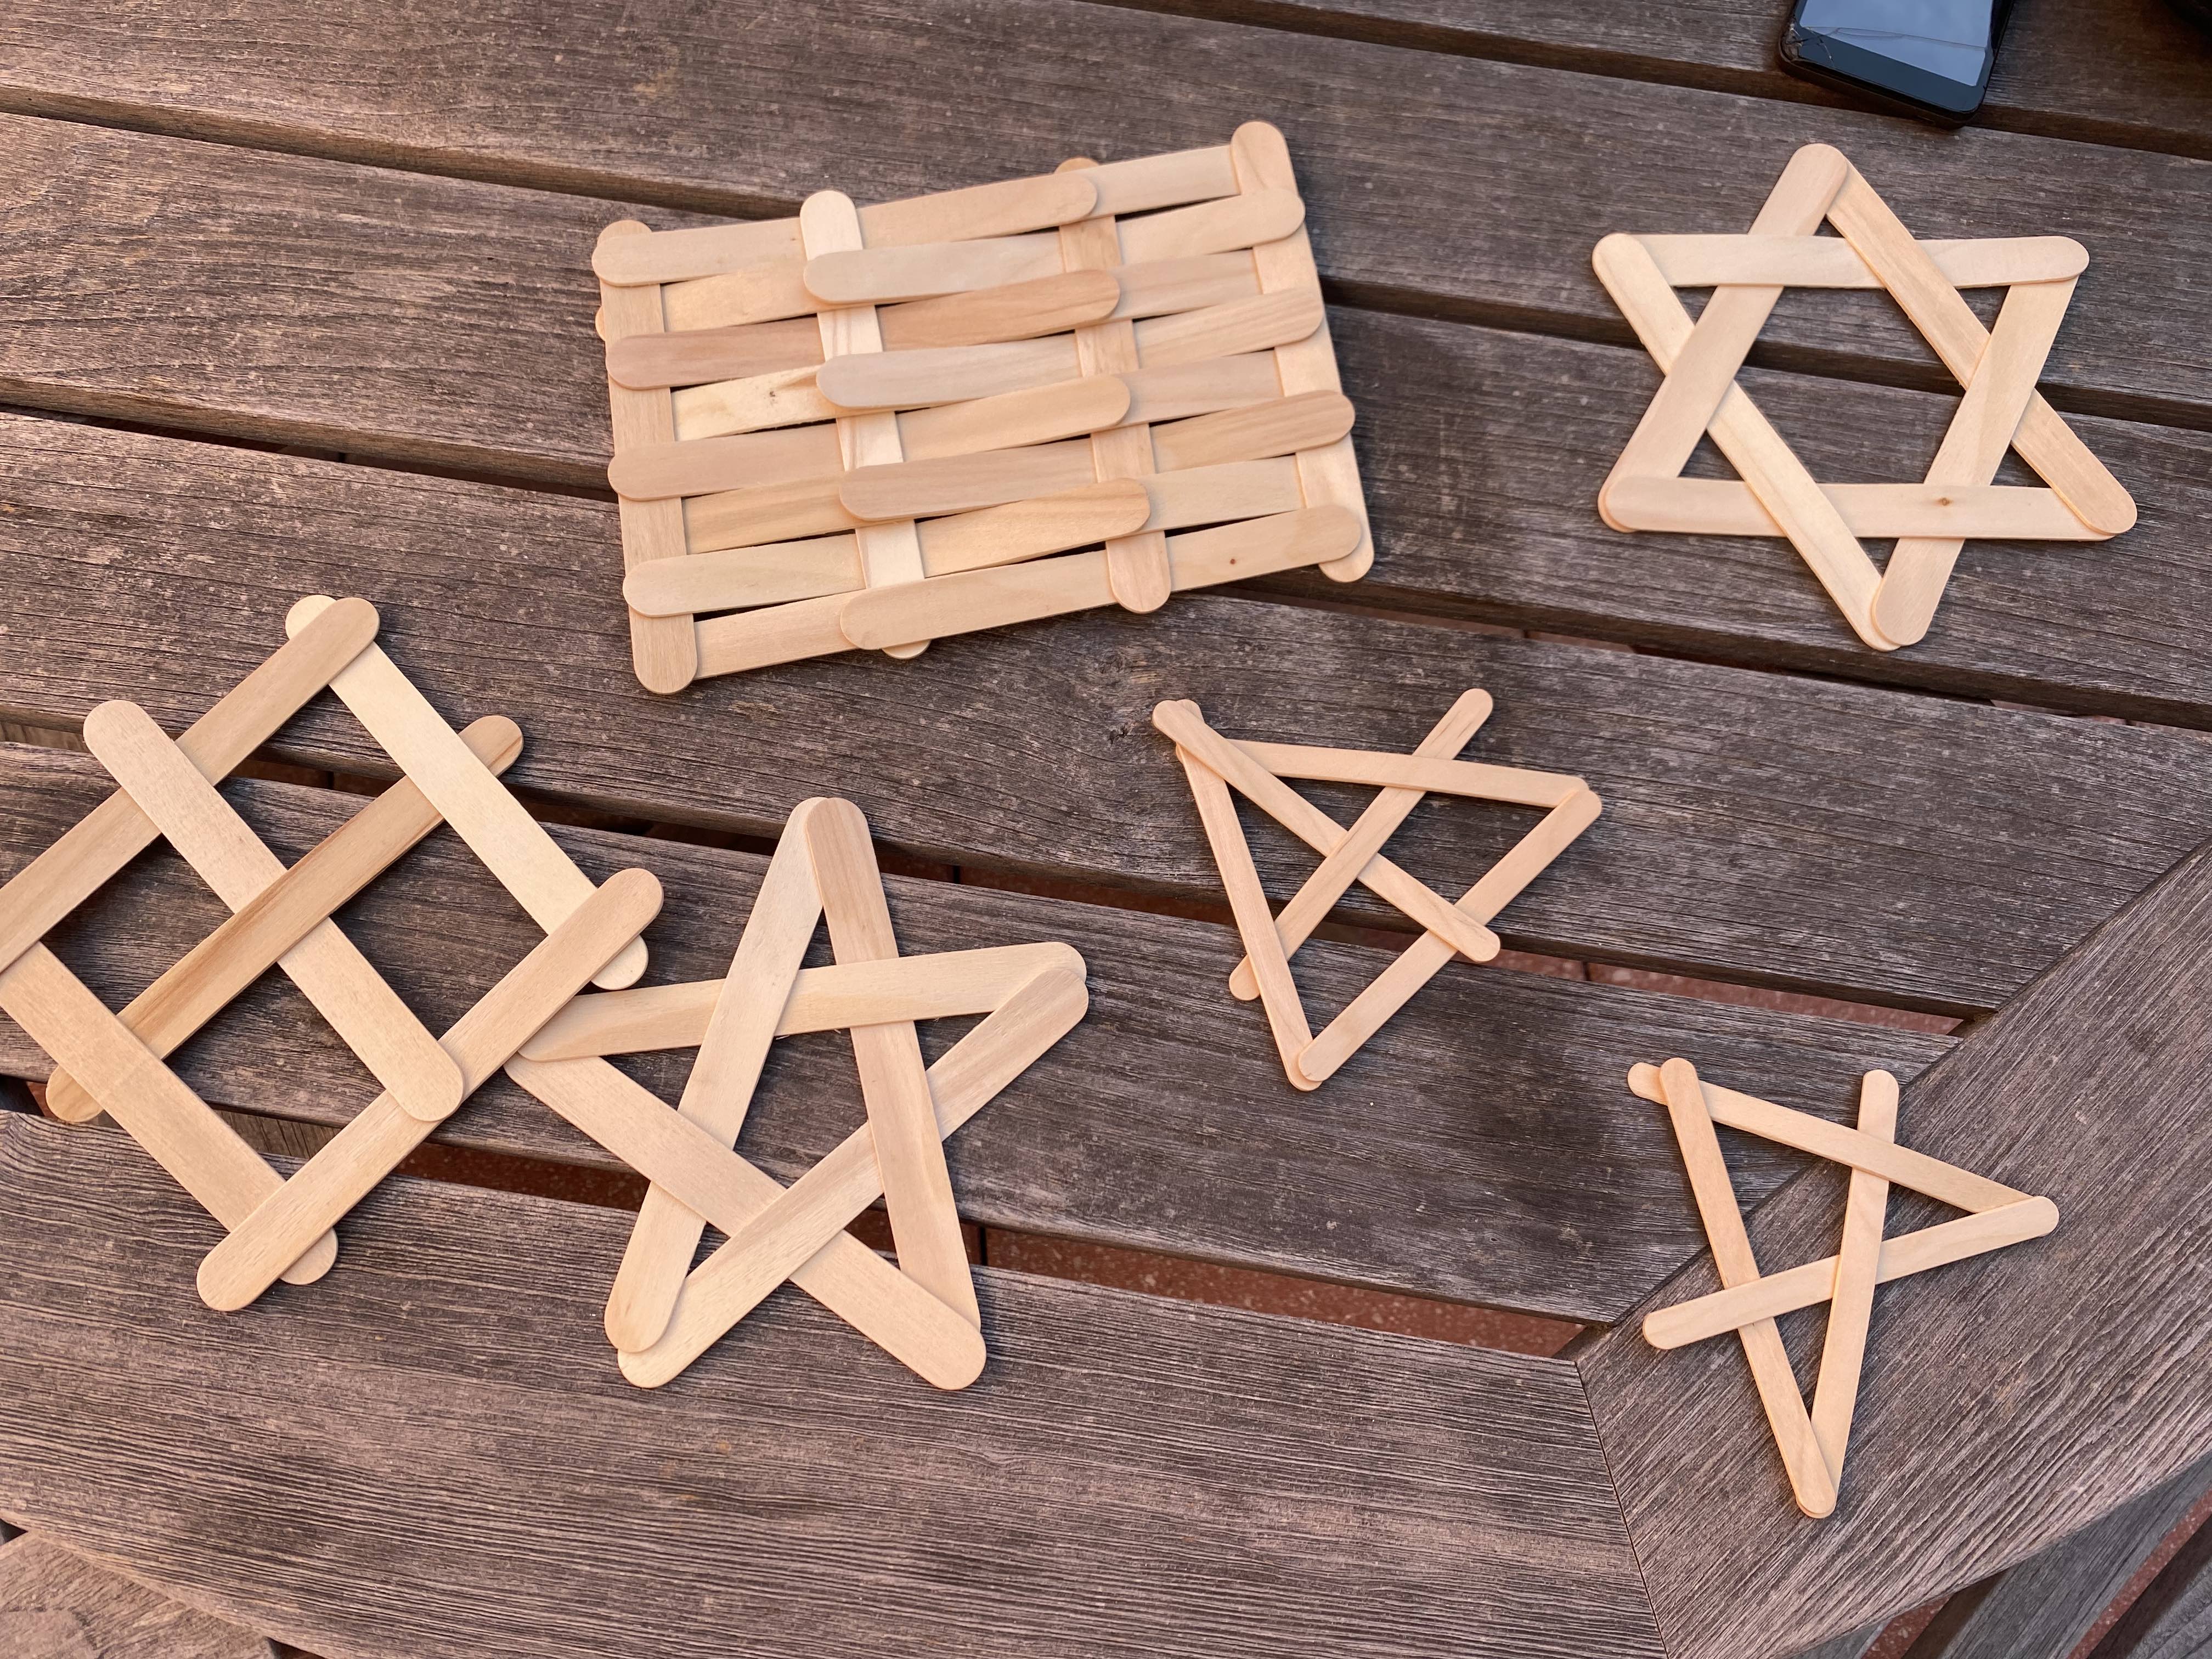 Table full of woven sticks, in litle star shapes and the like